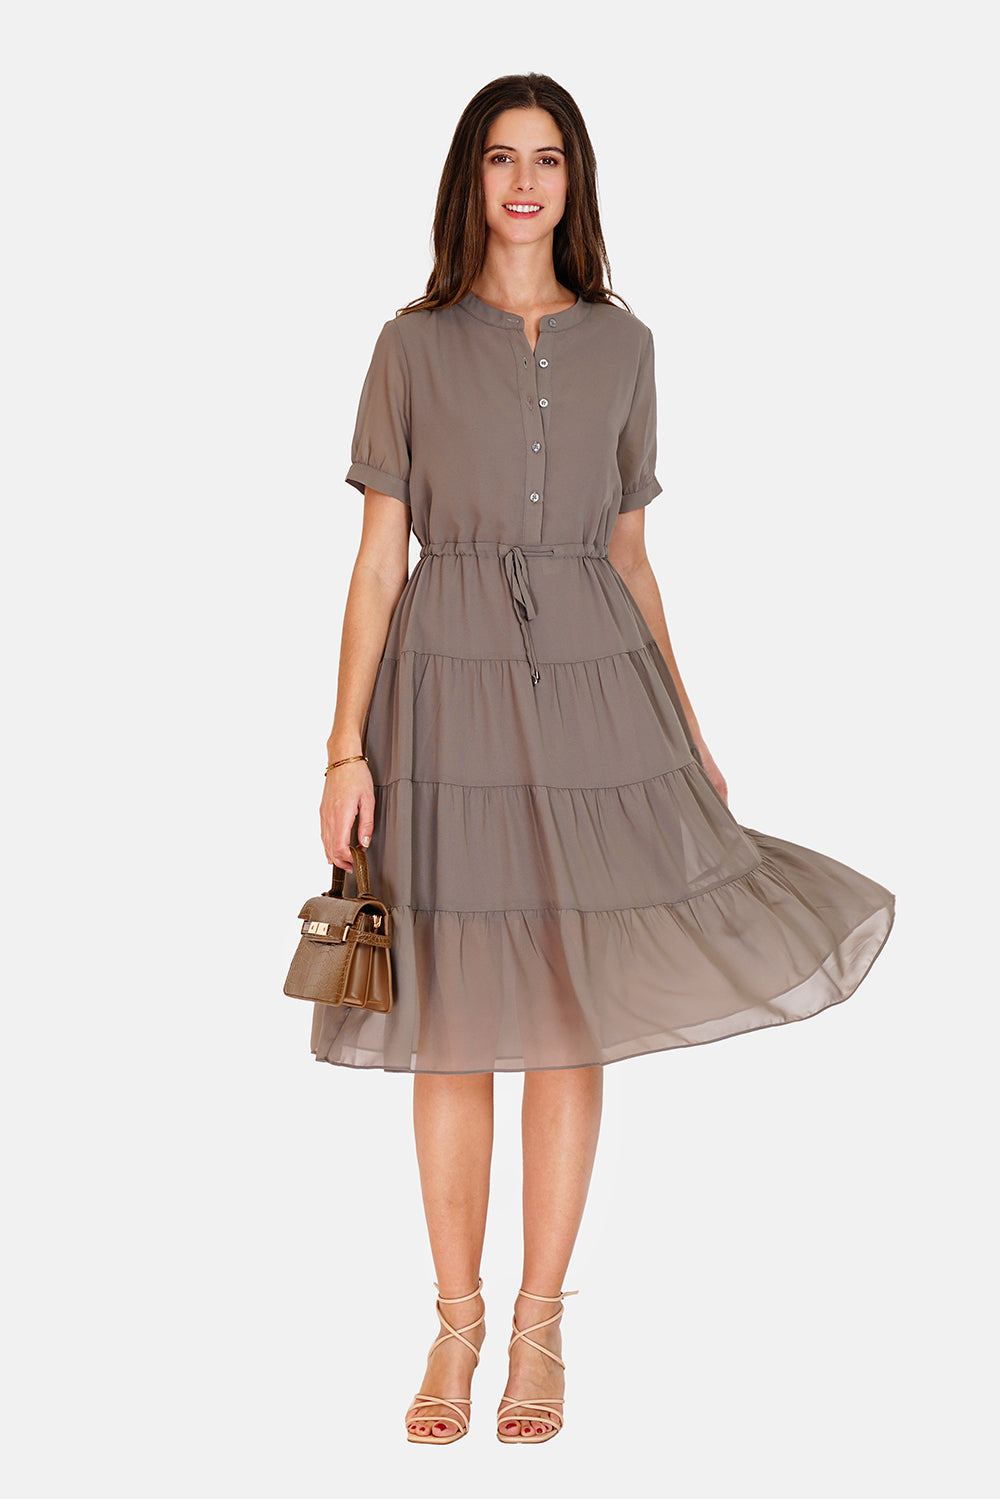 Long dress with peter pan collar, buttoned front, ruffles and short sleeves